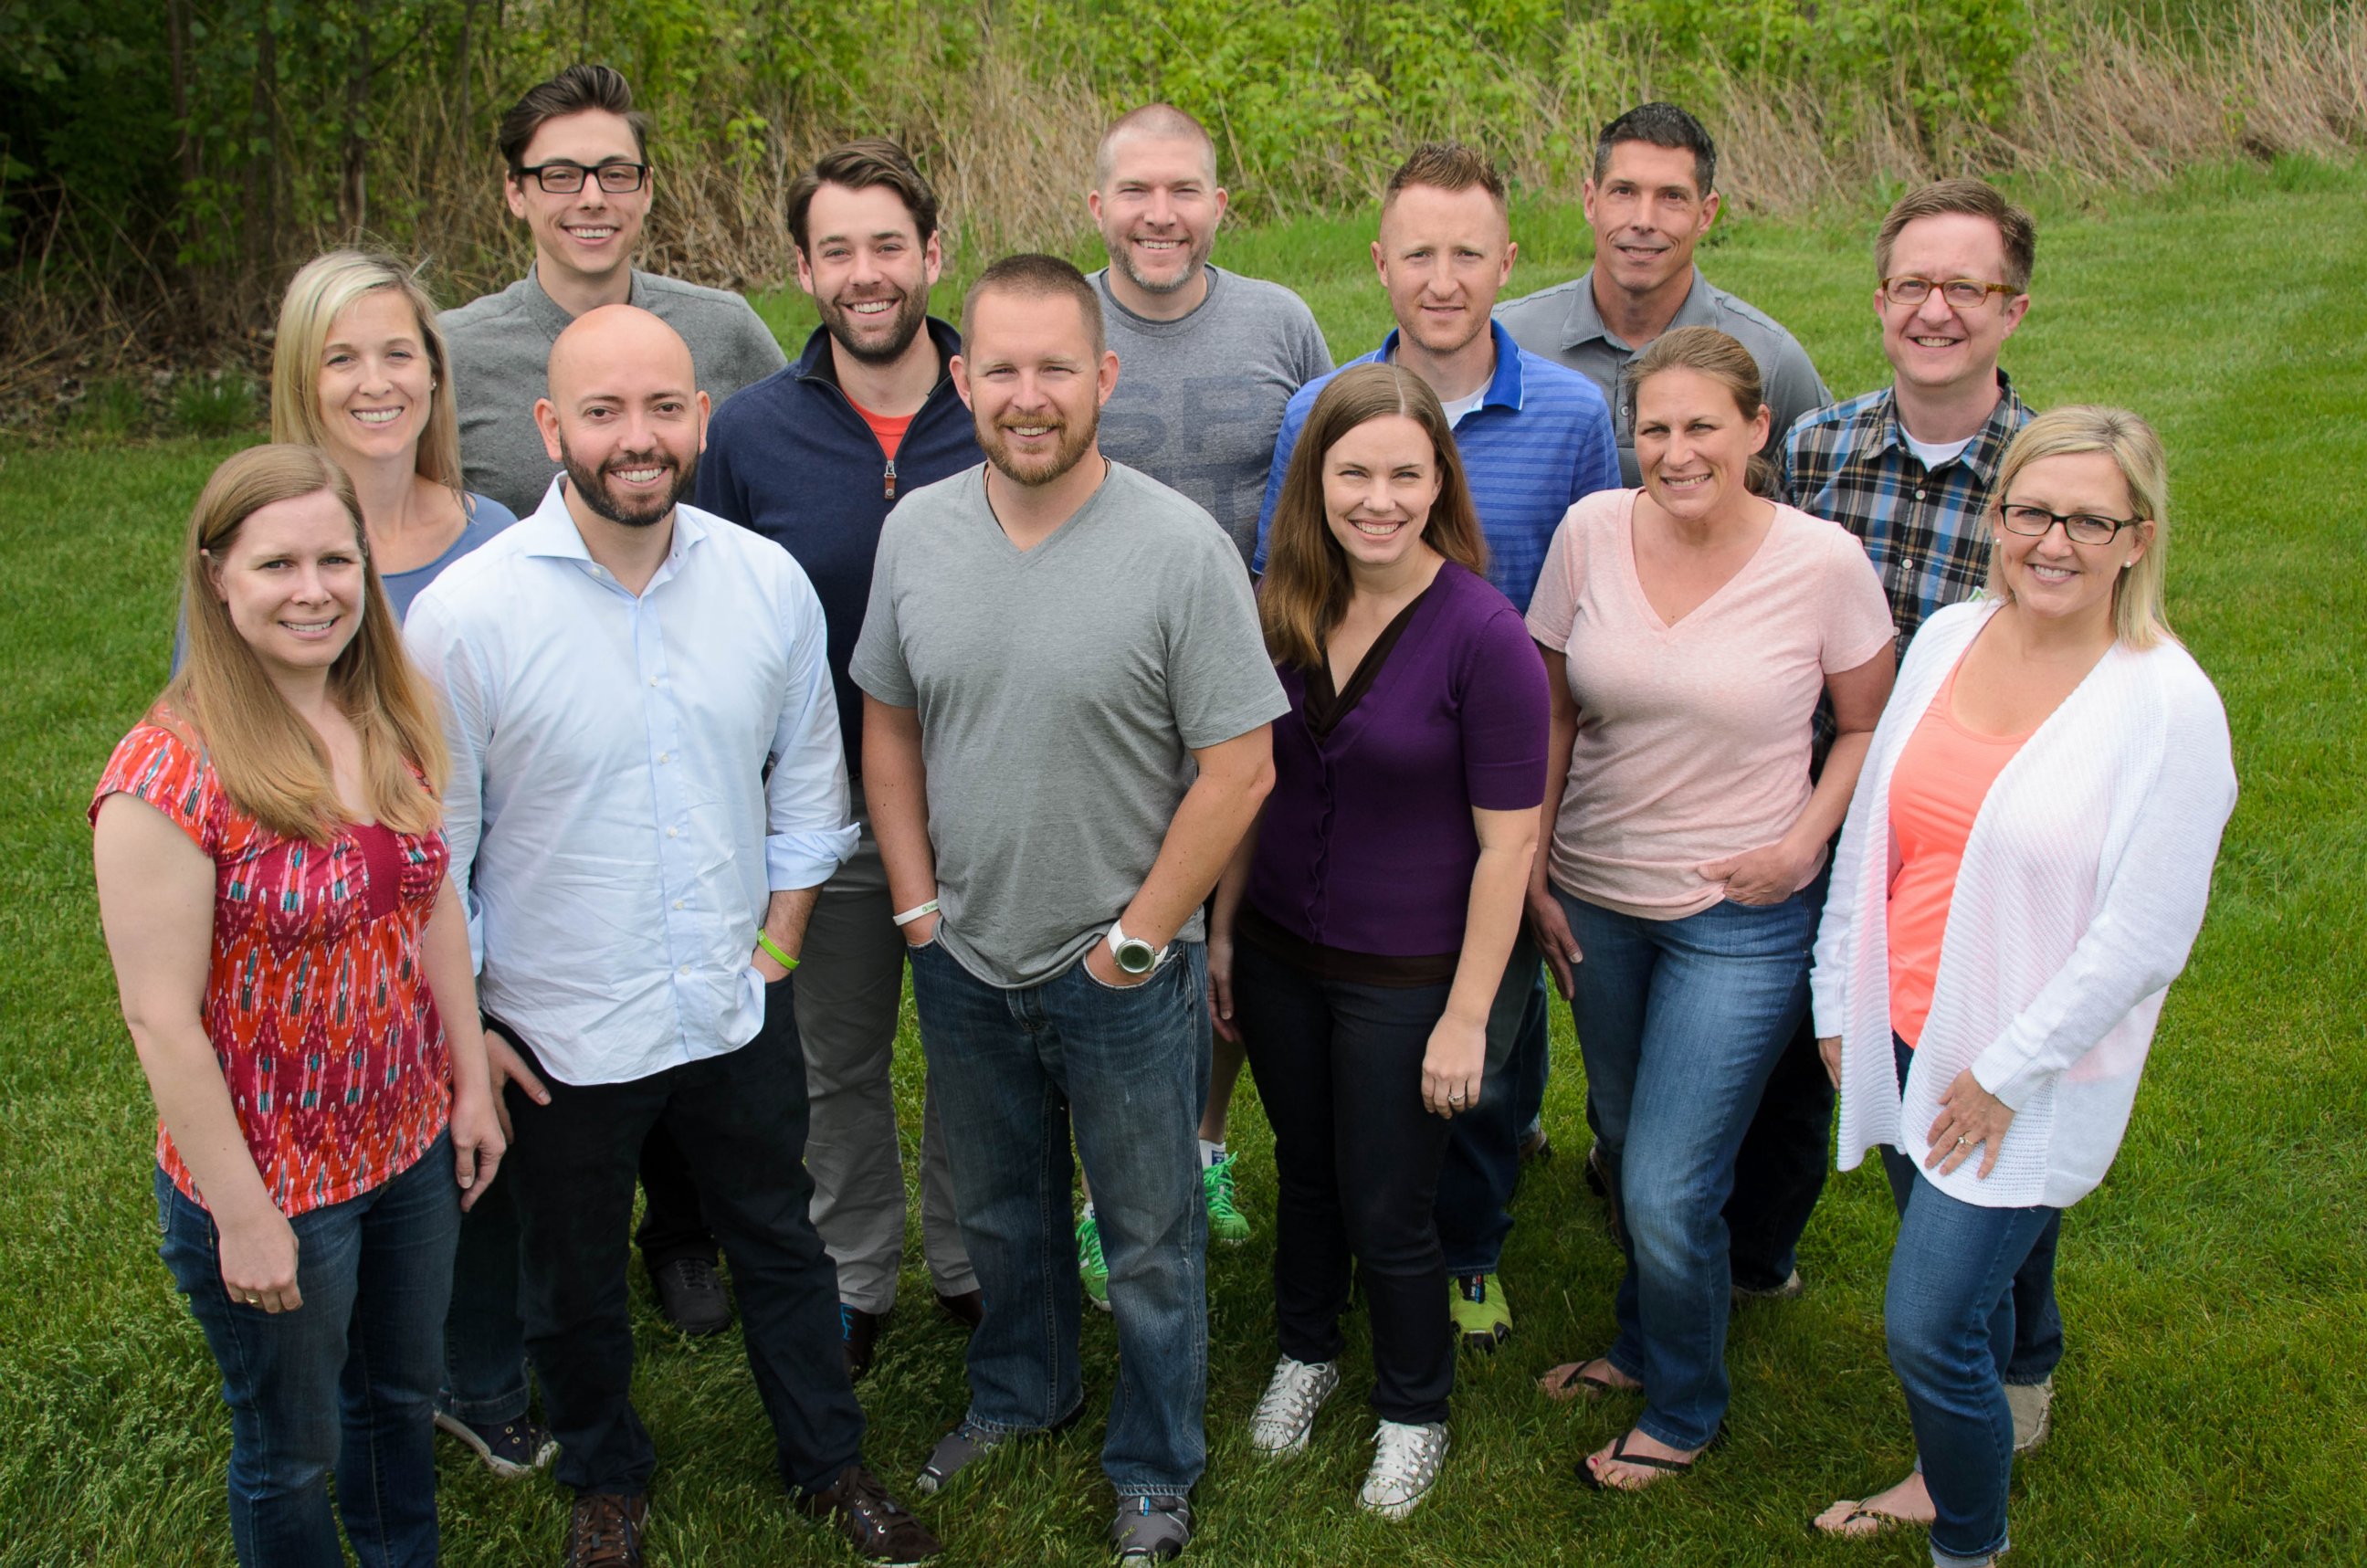 PHOTO: The team of Blooom, a personal finance company based in Kansas City, Kansas. 